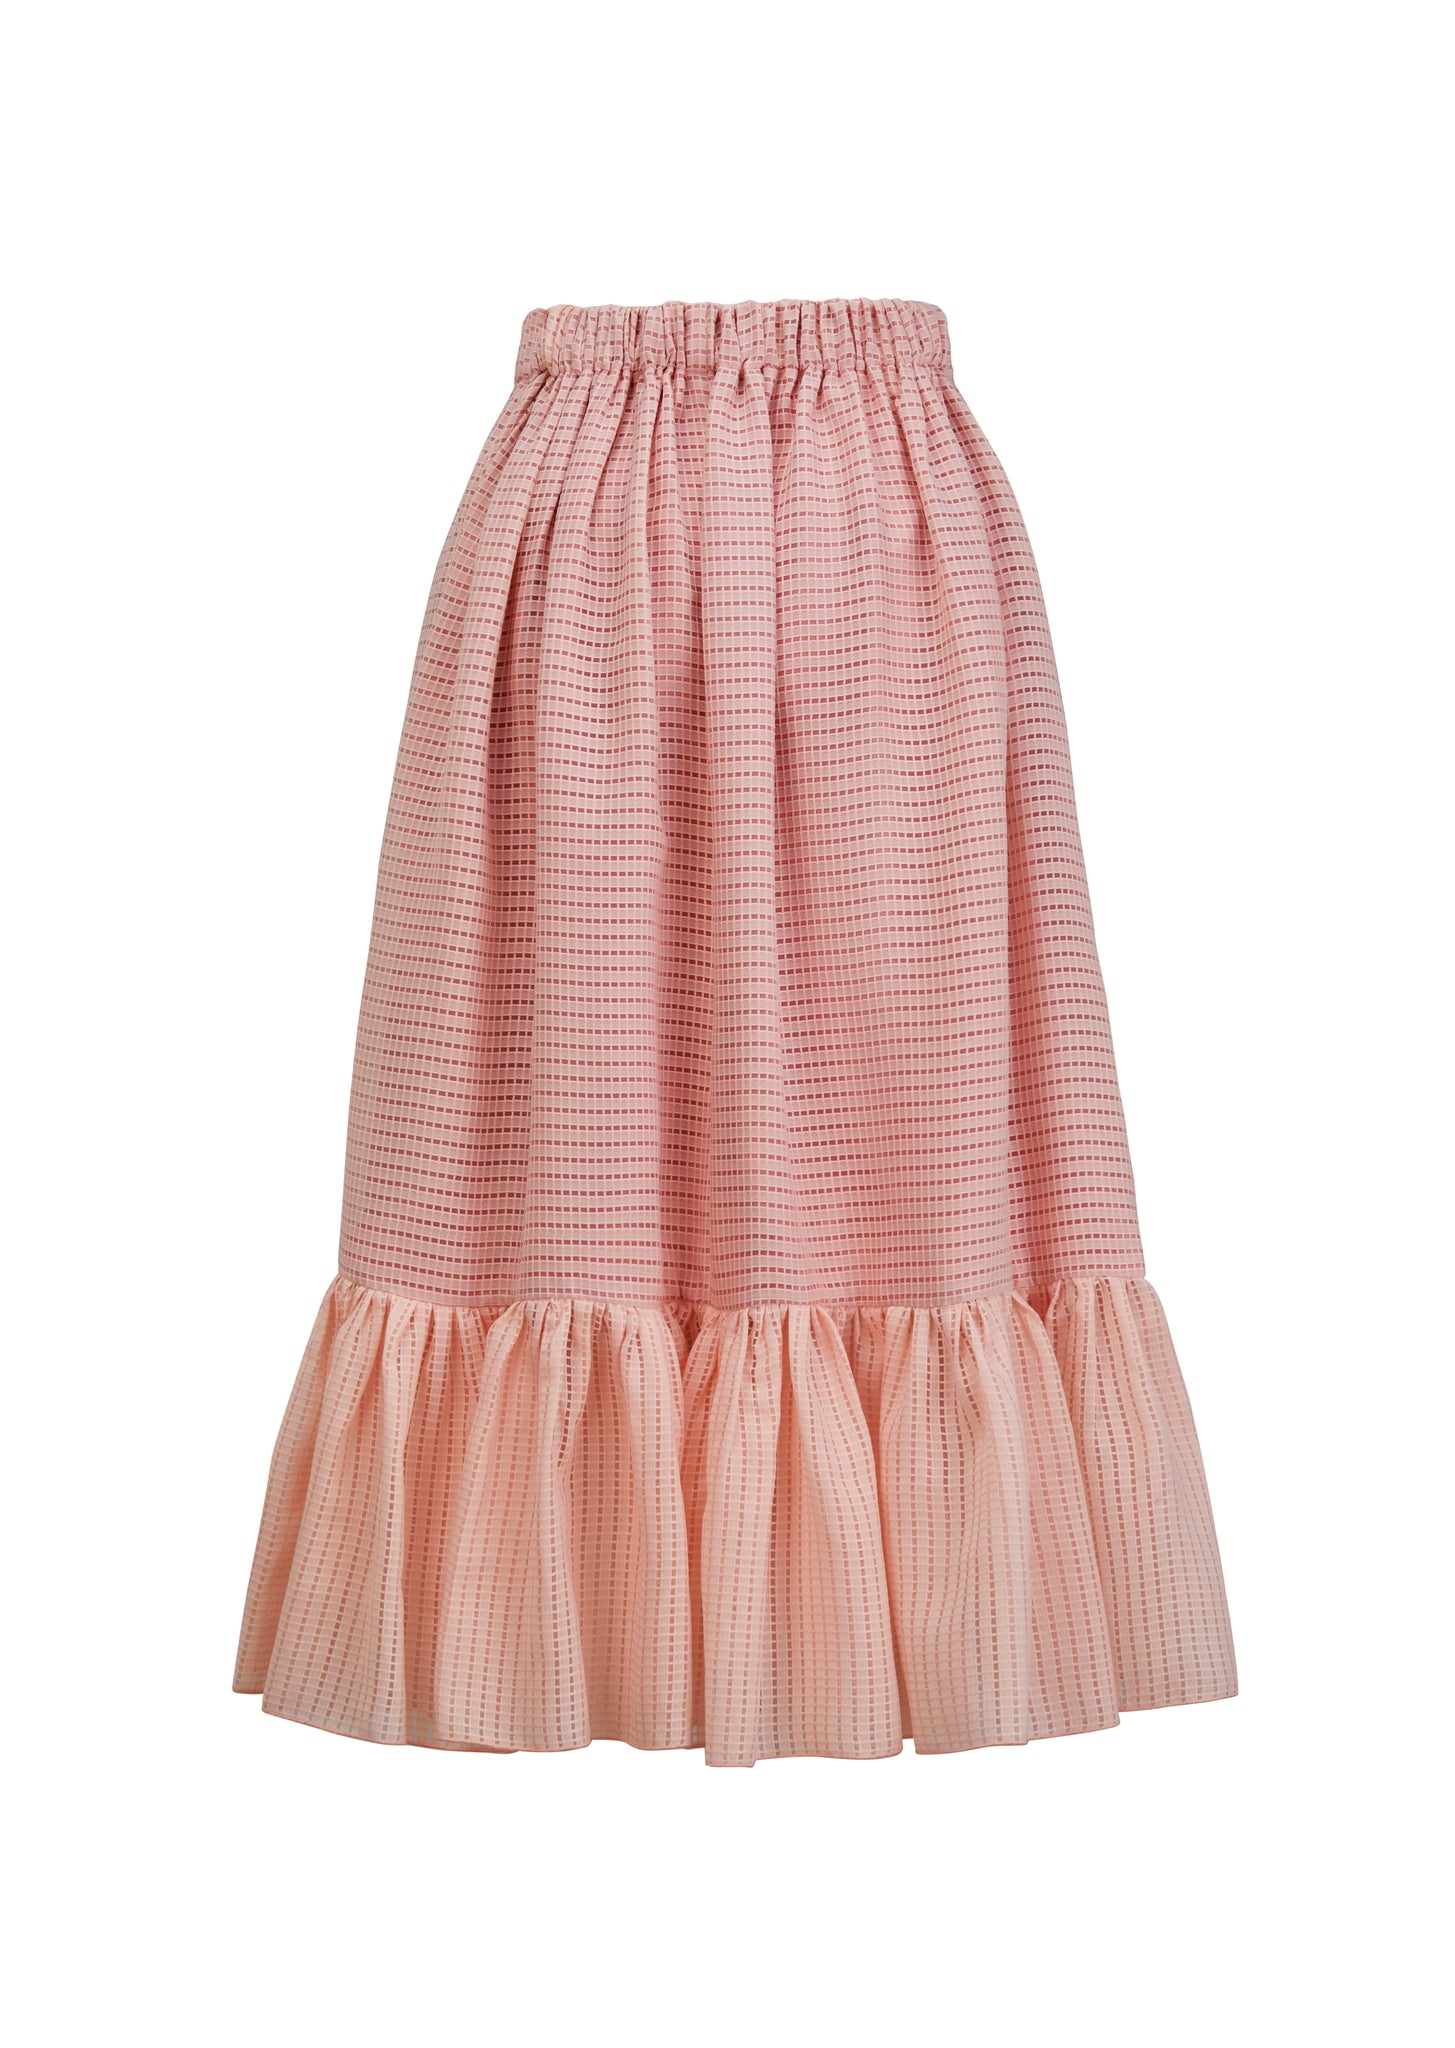 Birds In The City : Ansley Skirt in Coral